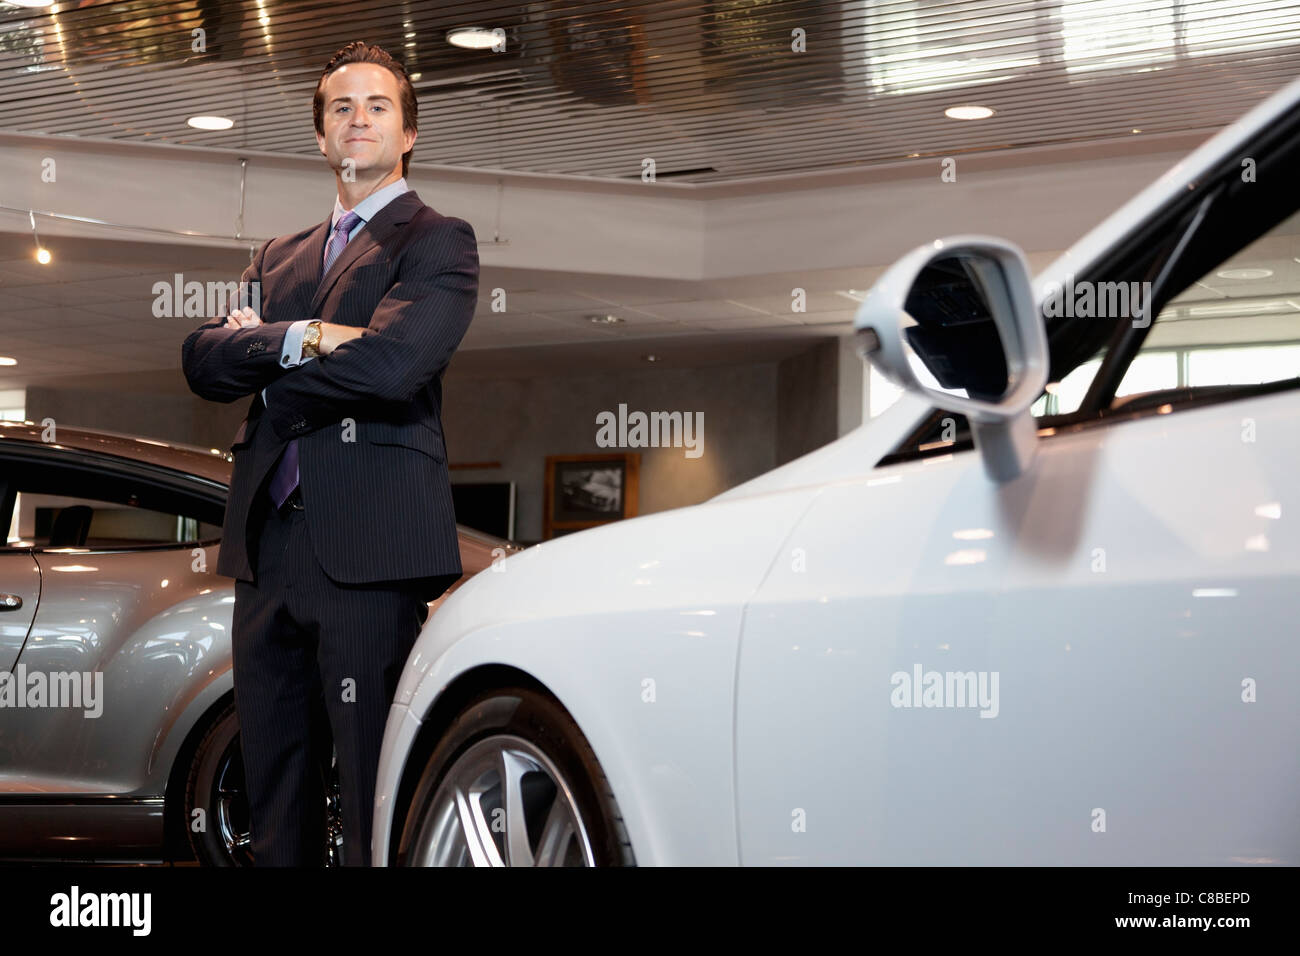 Confident car salesperson standing with arms crossed Stock Photo